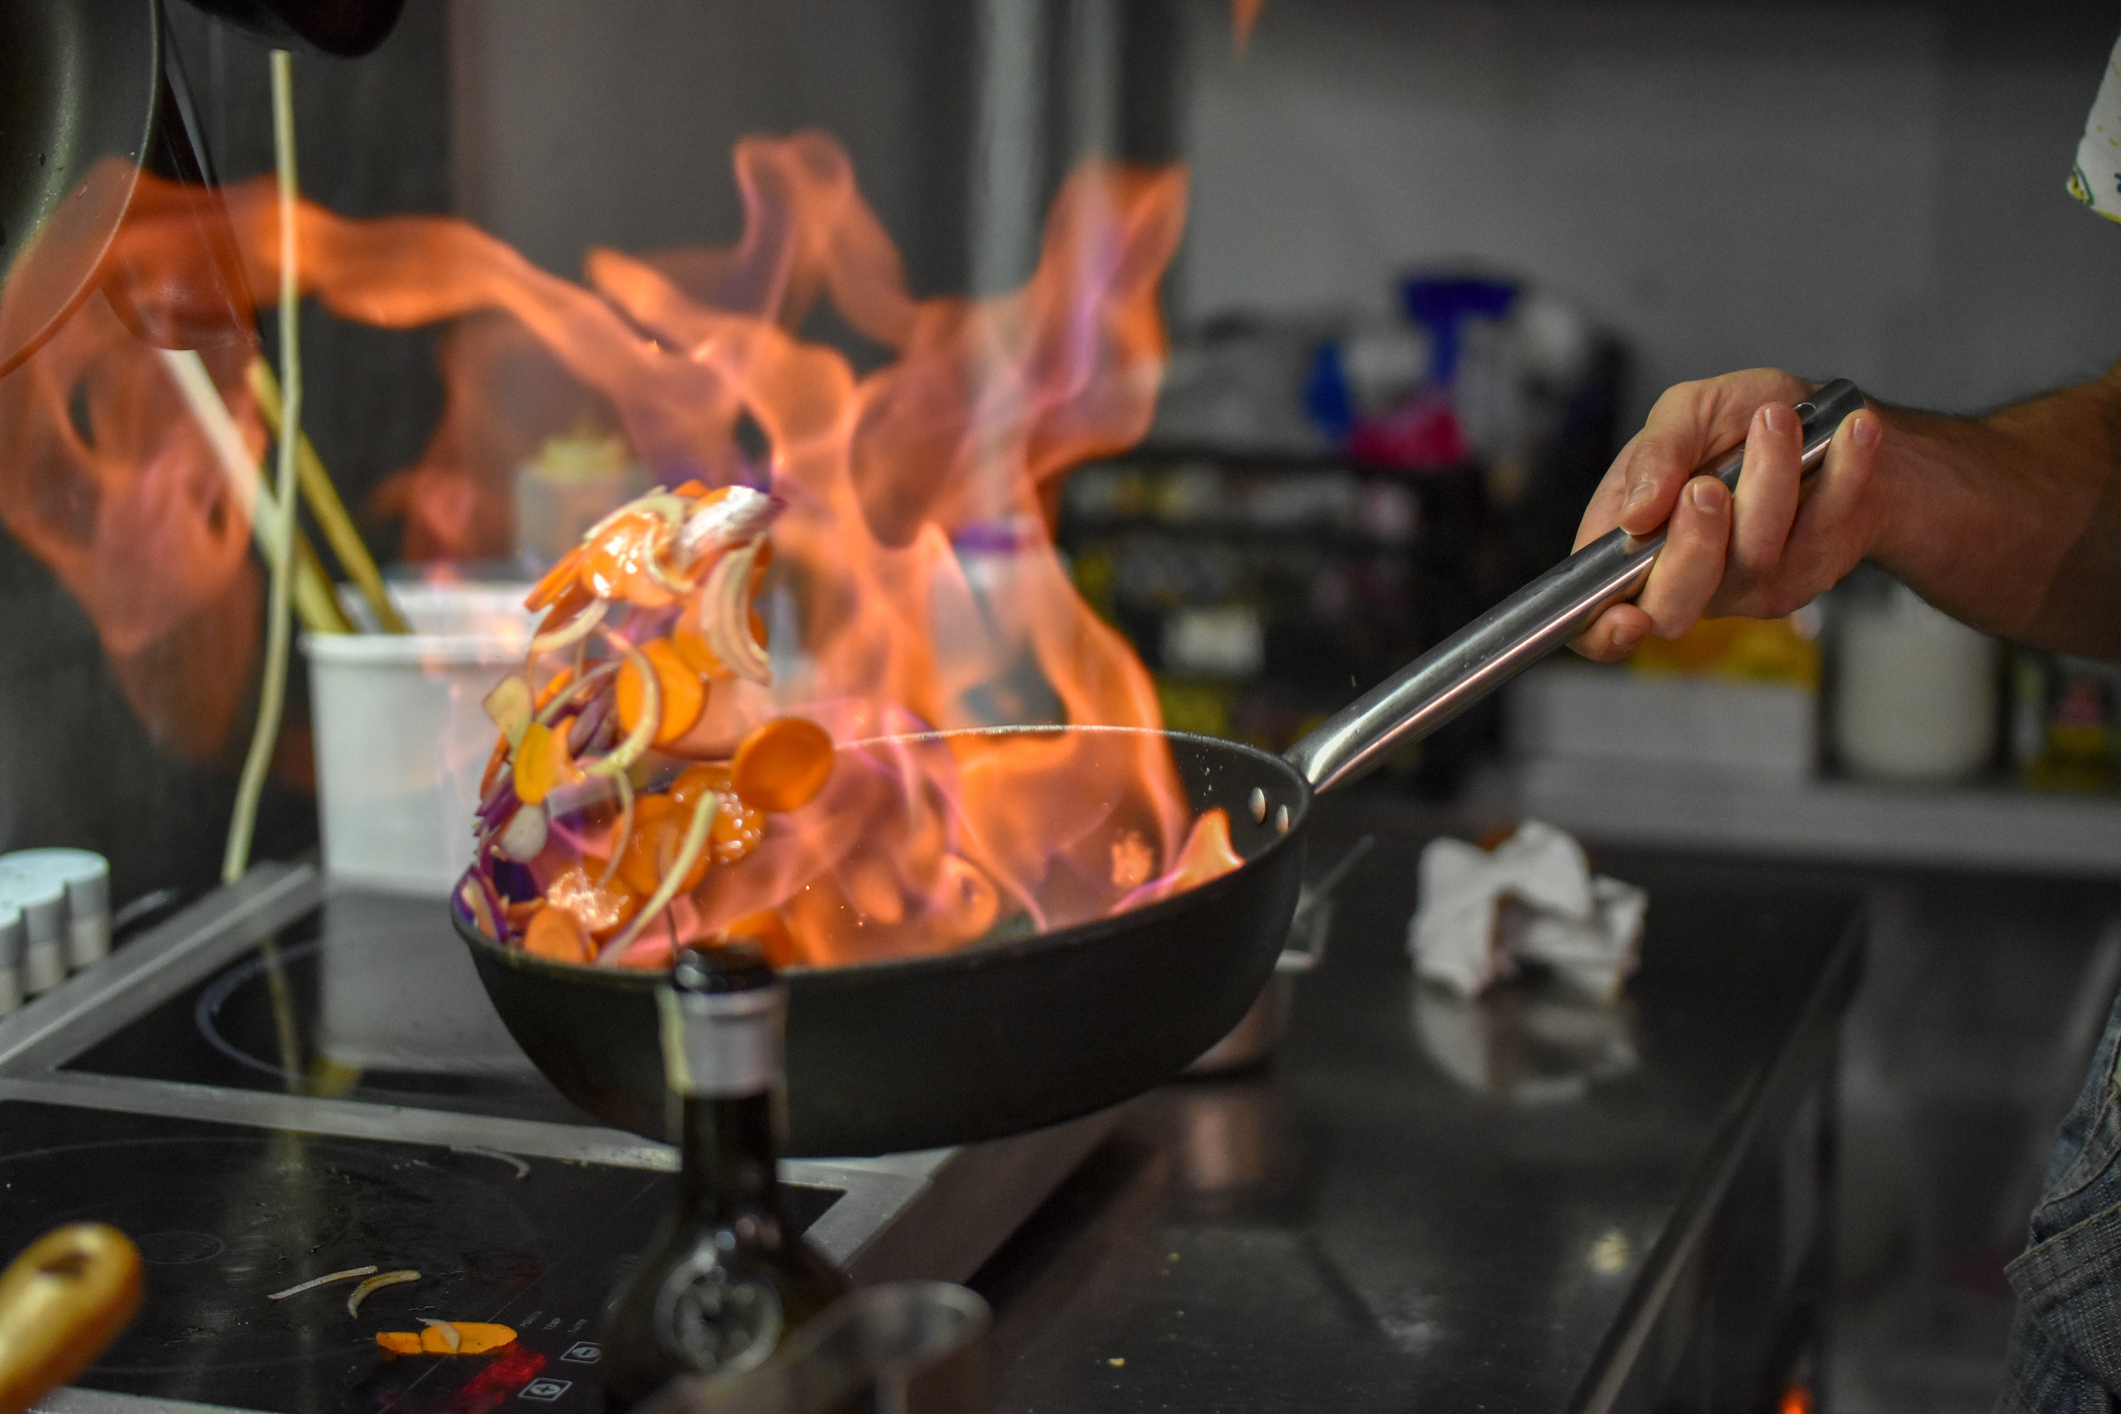 A person cooking on a skillet that has gone up in flames